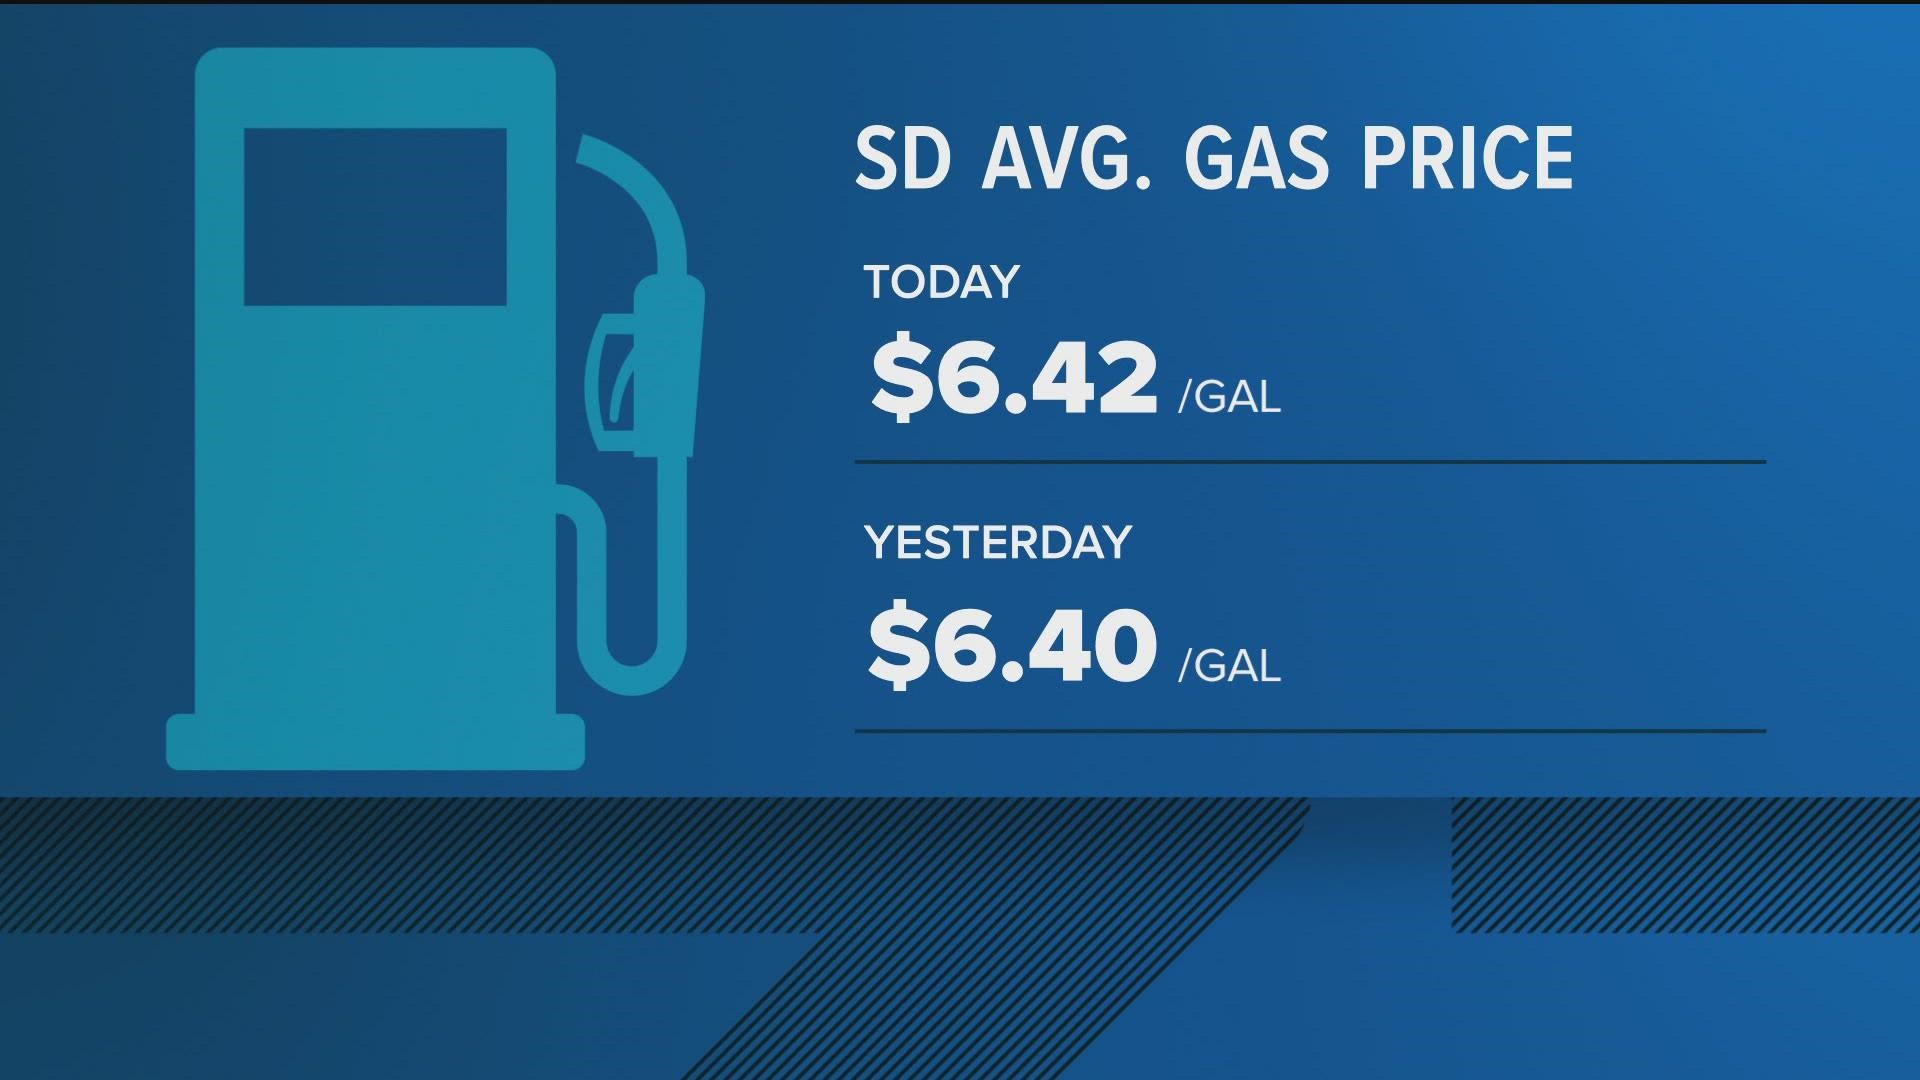 The average price is 52.4 cents more than one week ago, $1.175 higher than one month ago and $2.06 greater than one year ago.